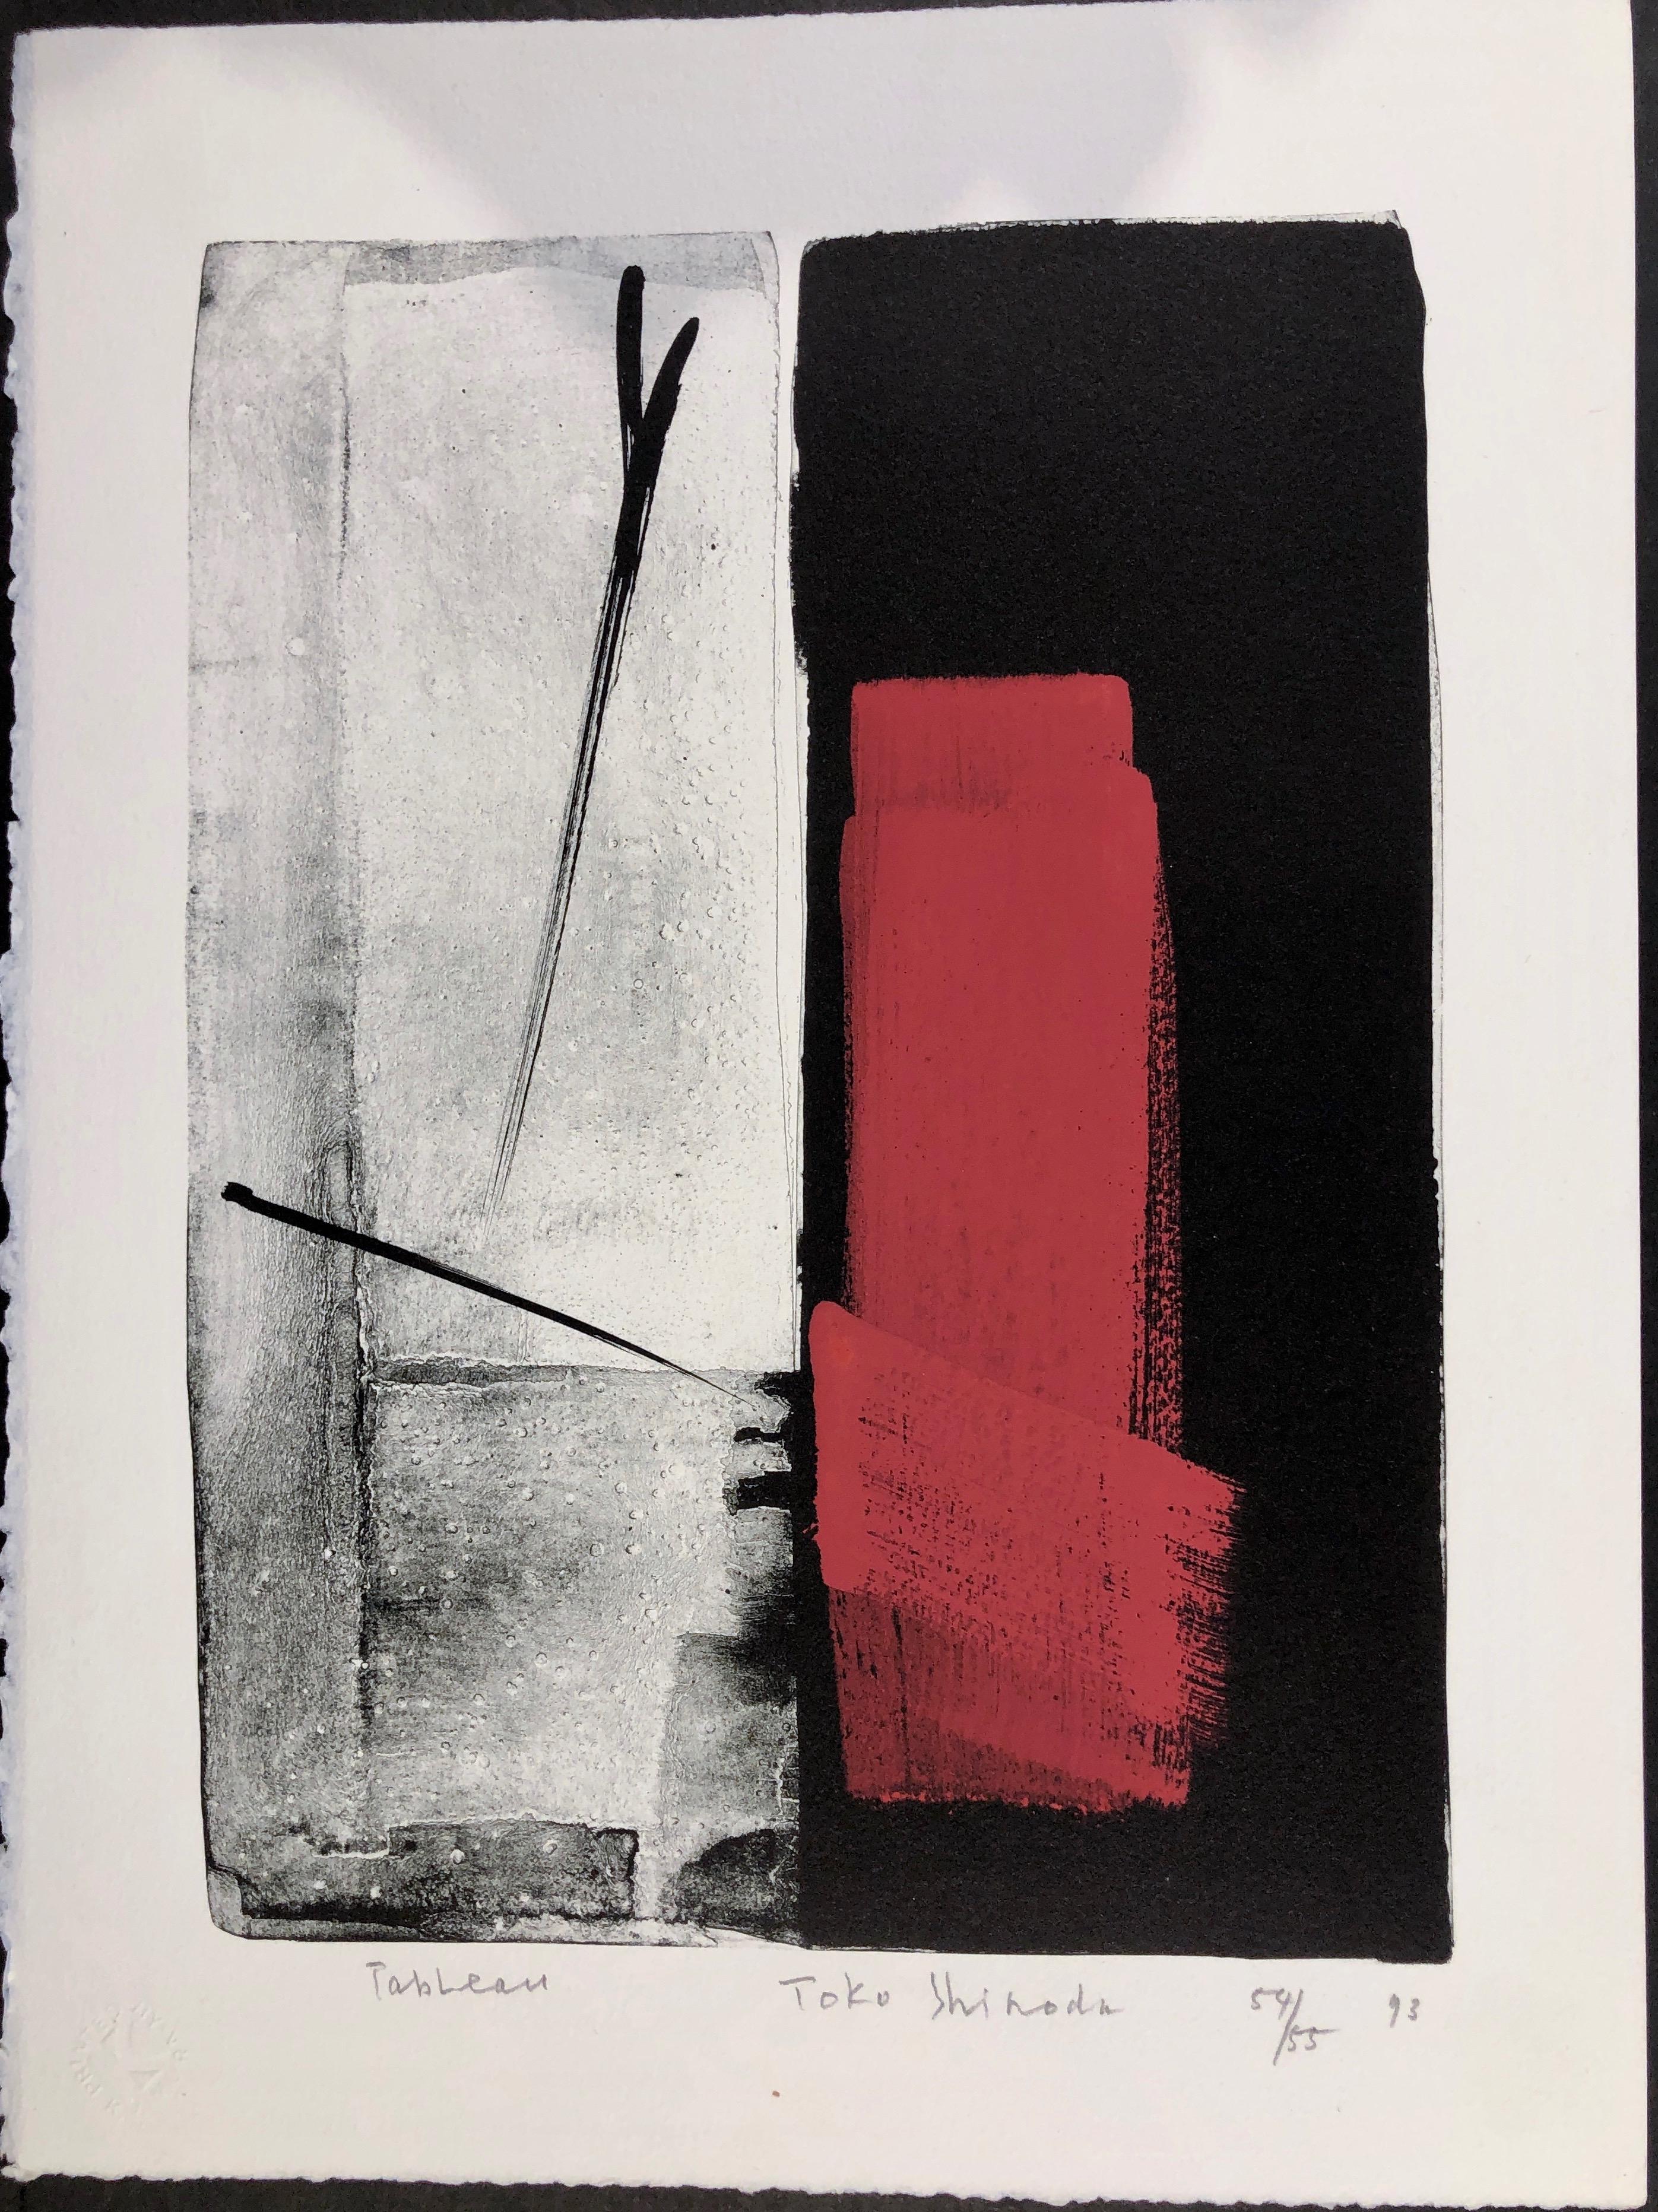 Toko Shinoda Abstract Print - Tableau, Japanese, limited edition lithograph, black, white, red, signed, number